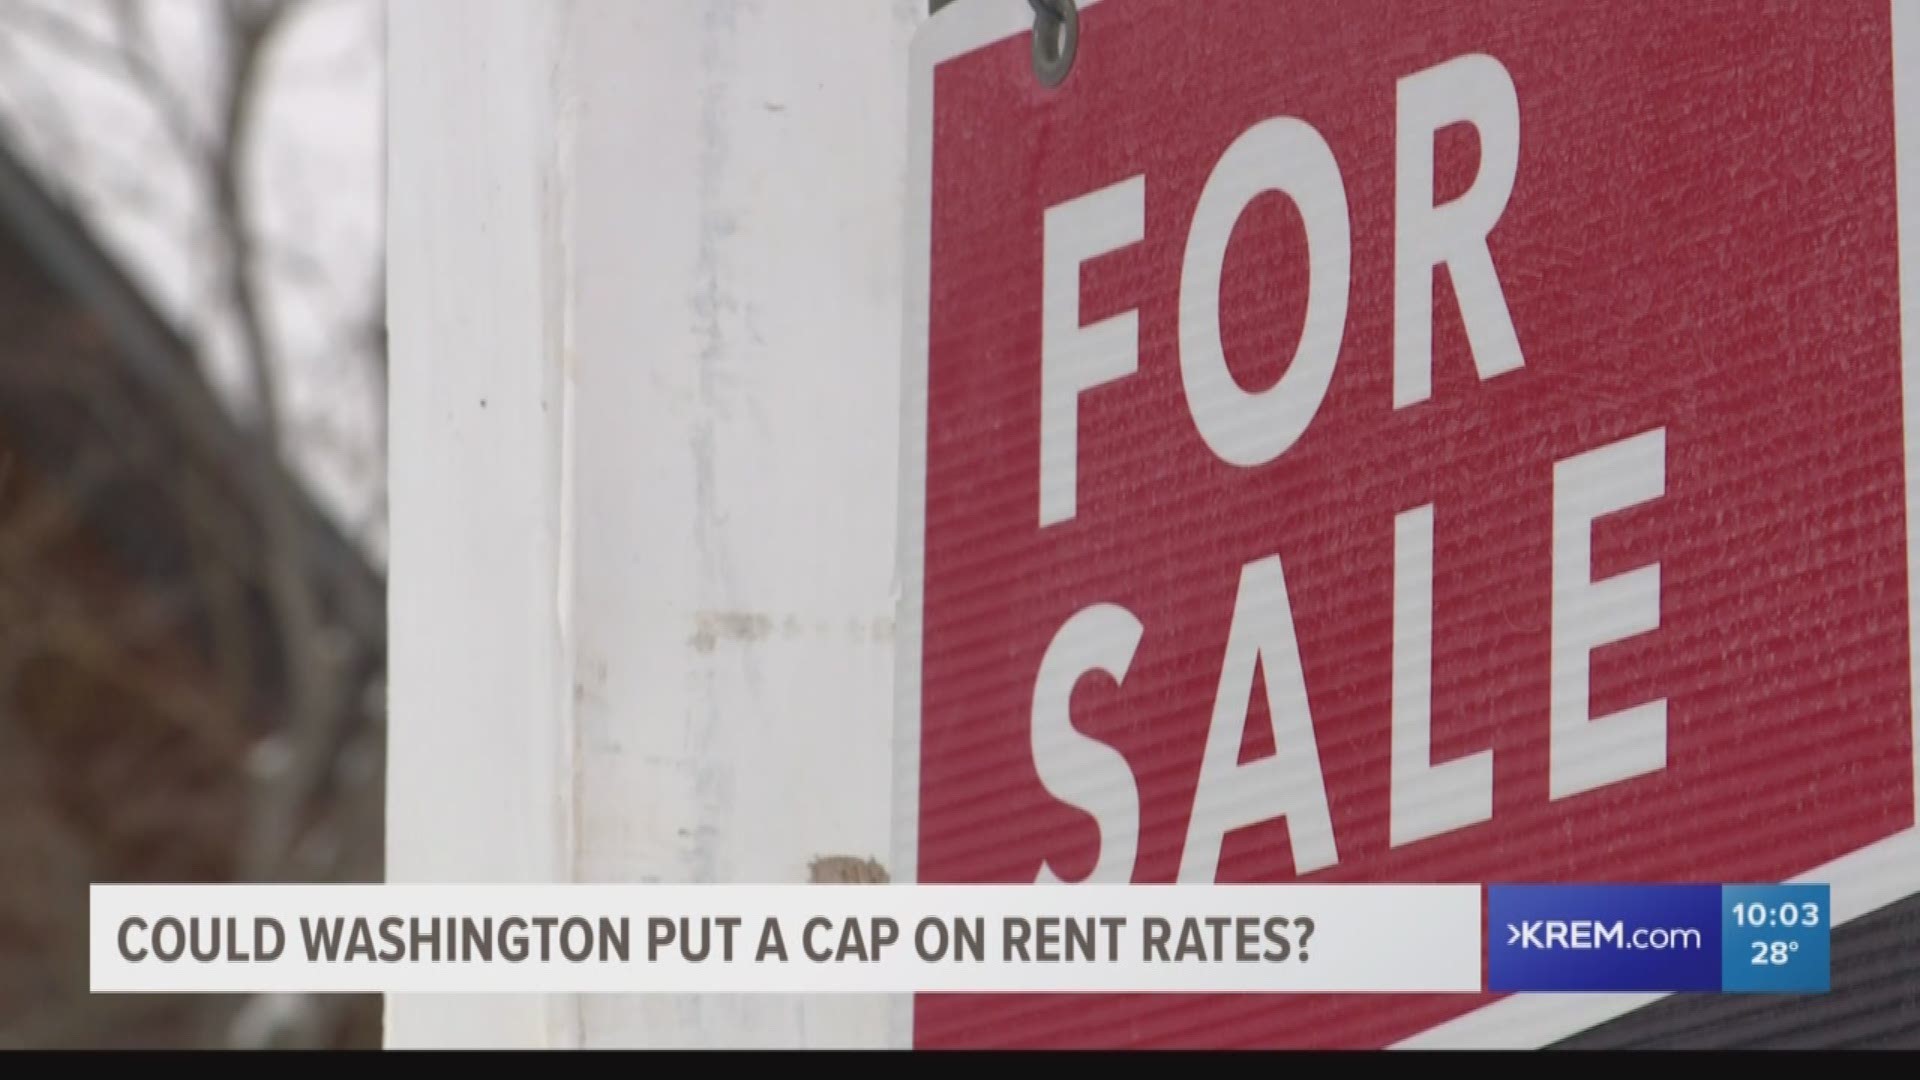 KREM Reporter Shayna Waltower explores the possibility of rent control coming into play in Washington.